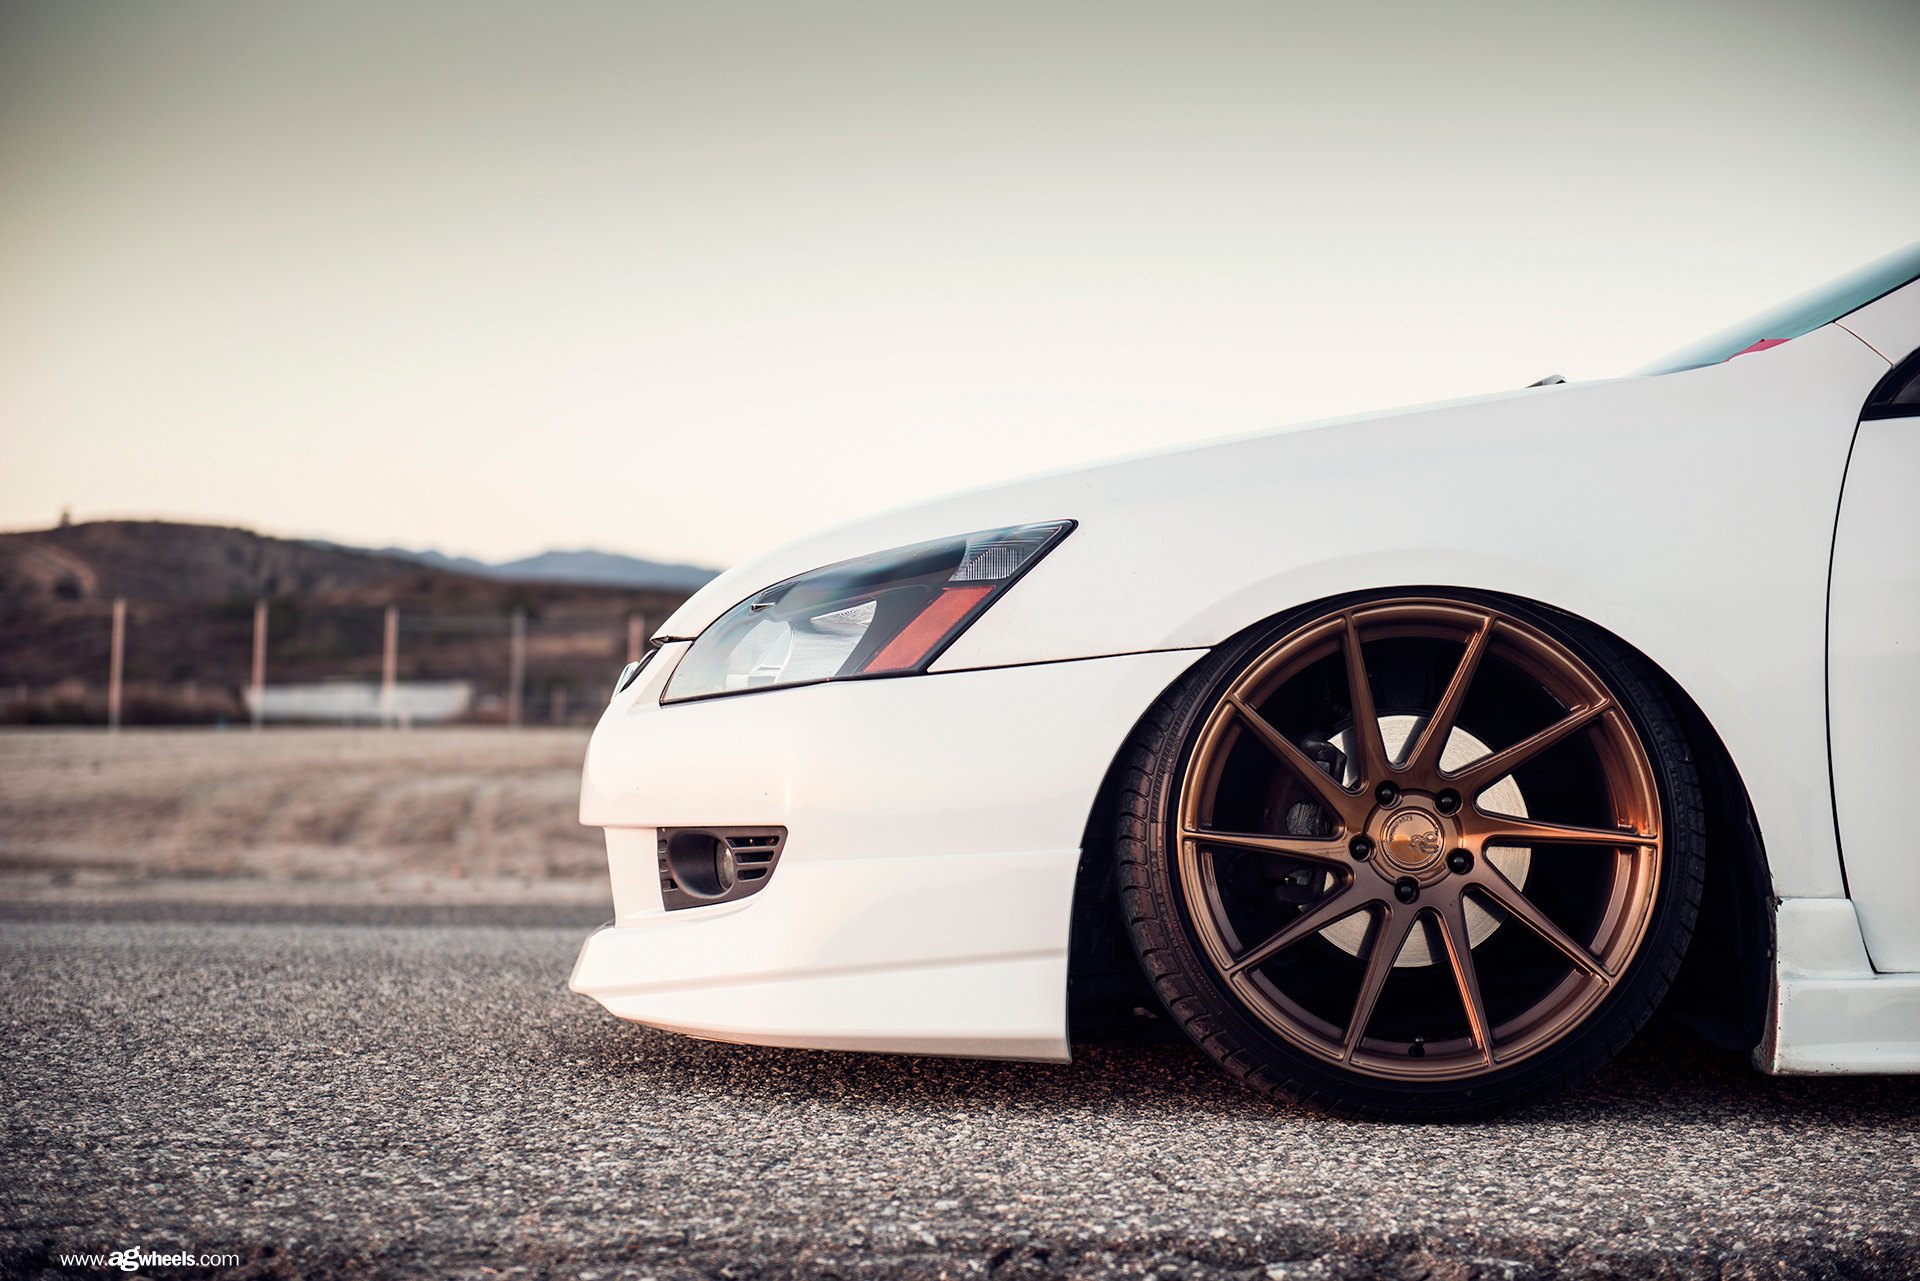 White Stanced Honda Accord with Aftermarket Headlights - Photo by Avant Garde Wheels